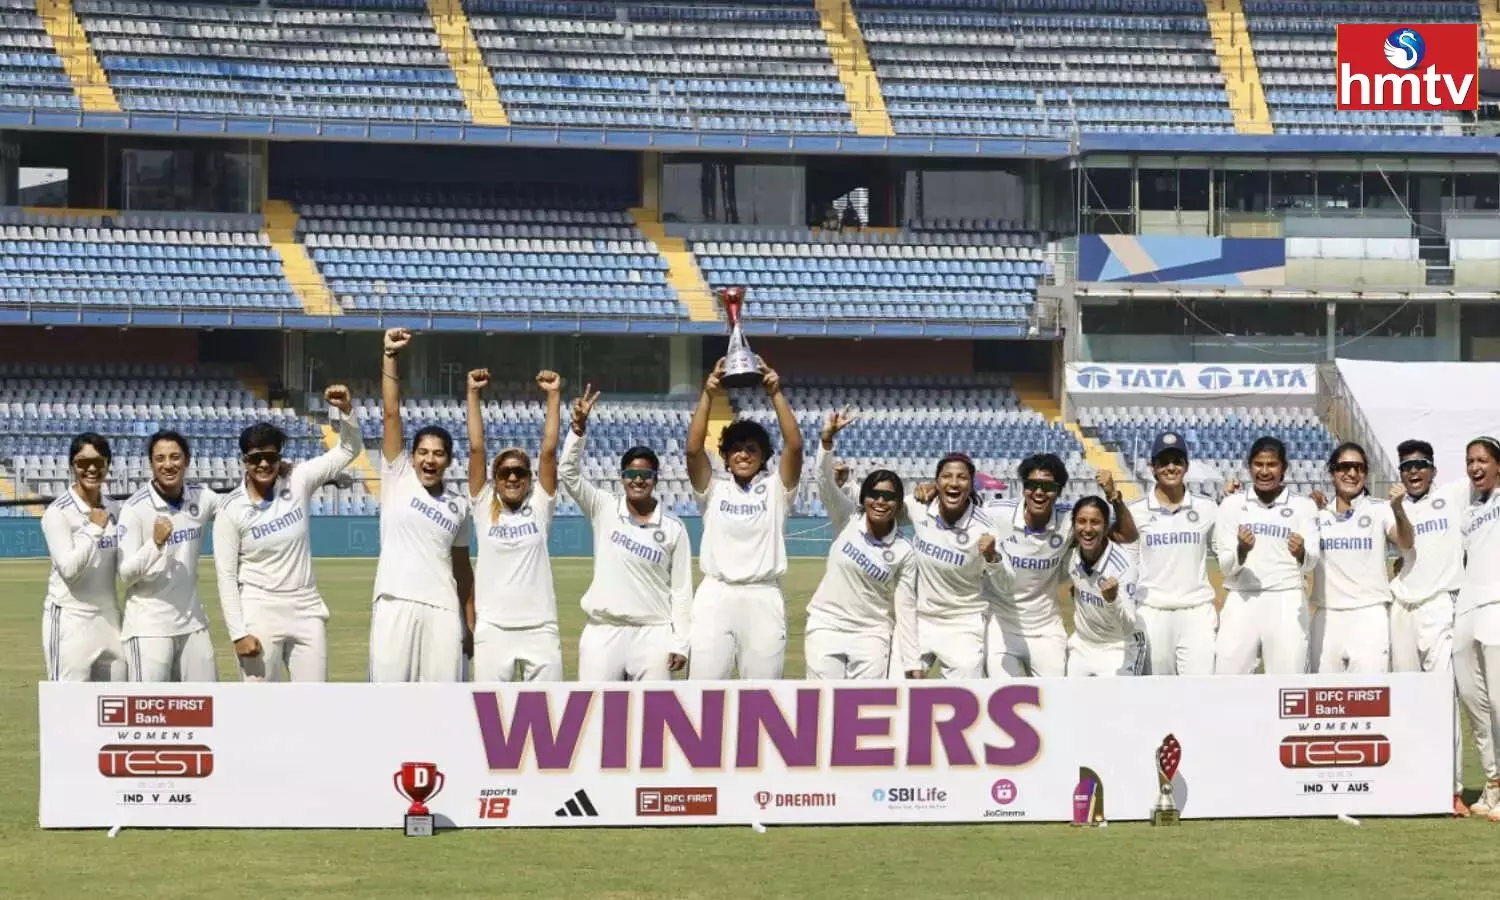 Team India Womens Team One By 8 Wickets In Only Test Match Peace Australia Match